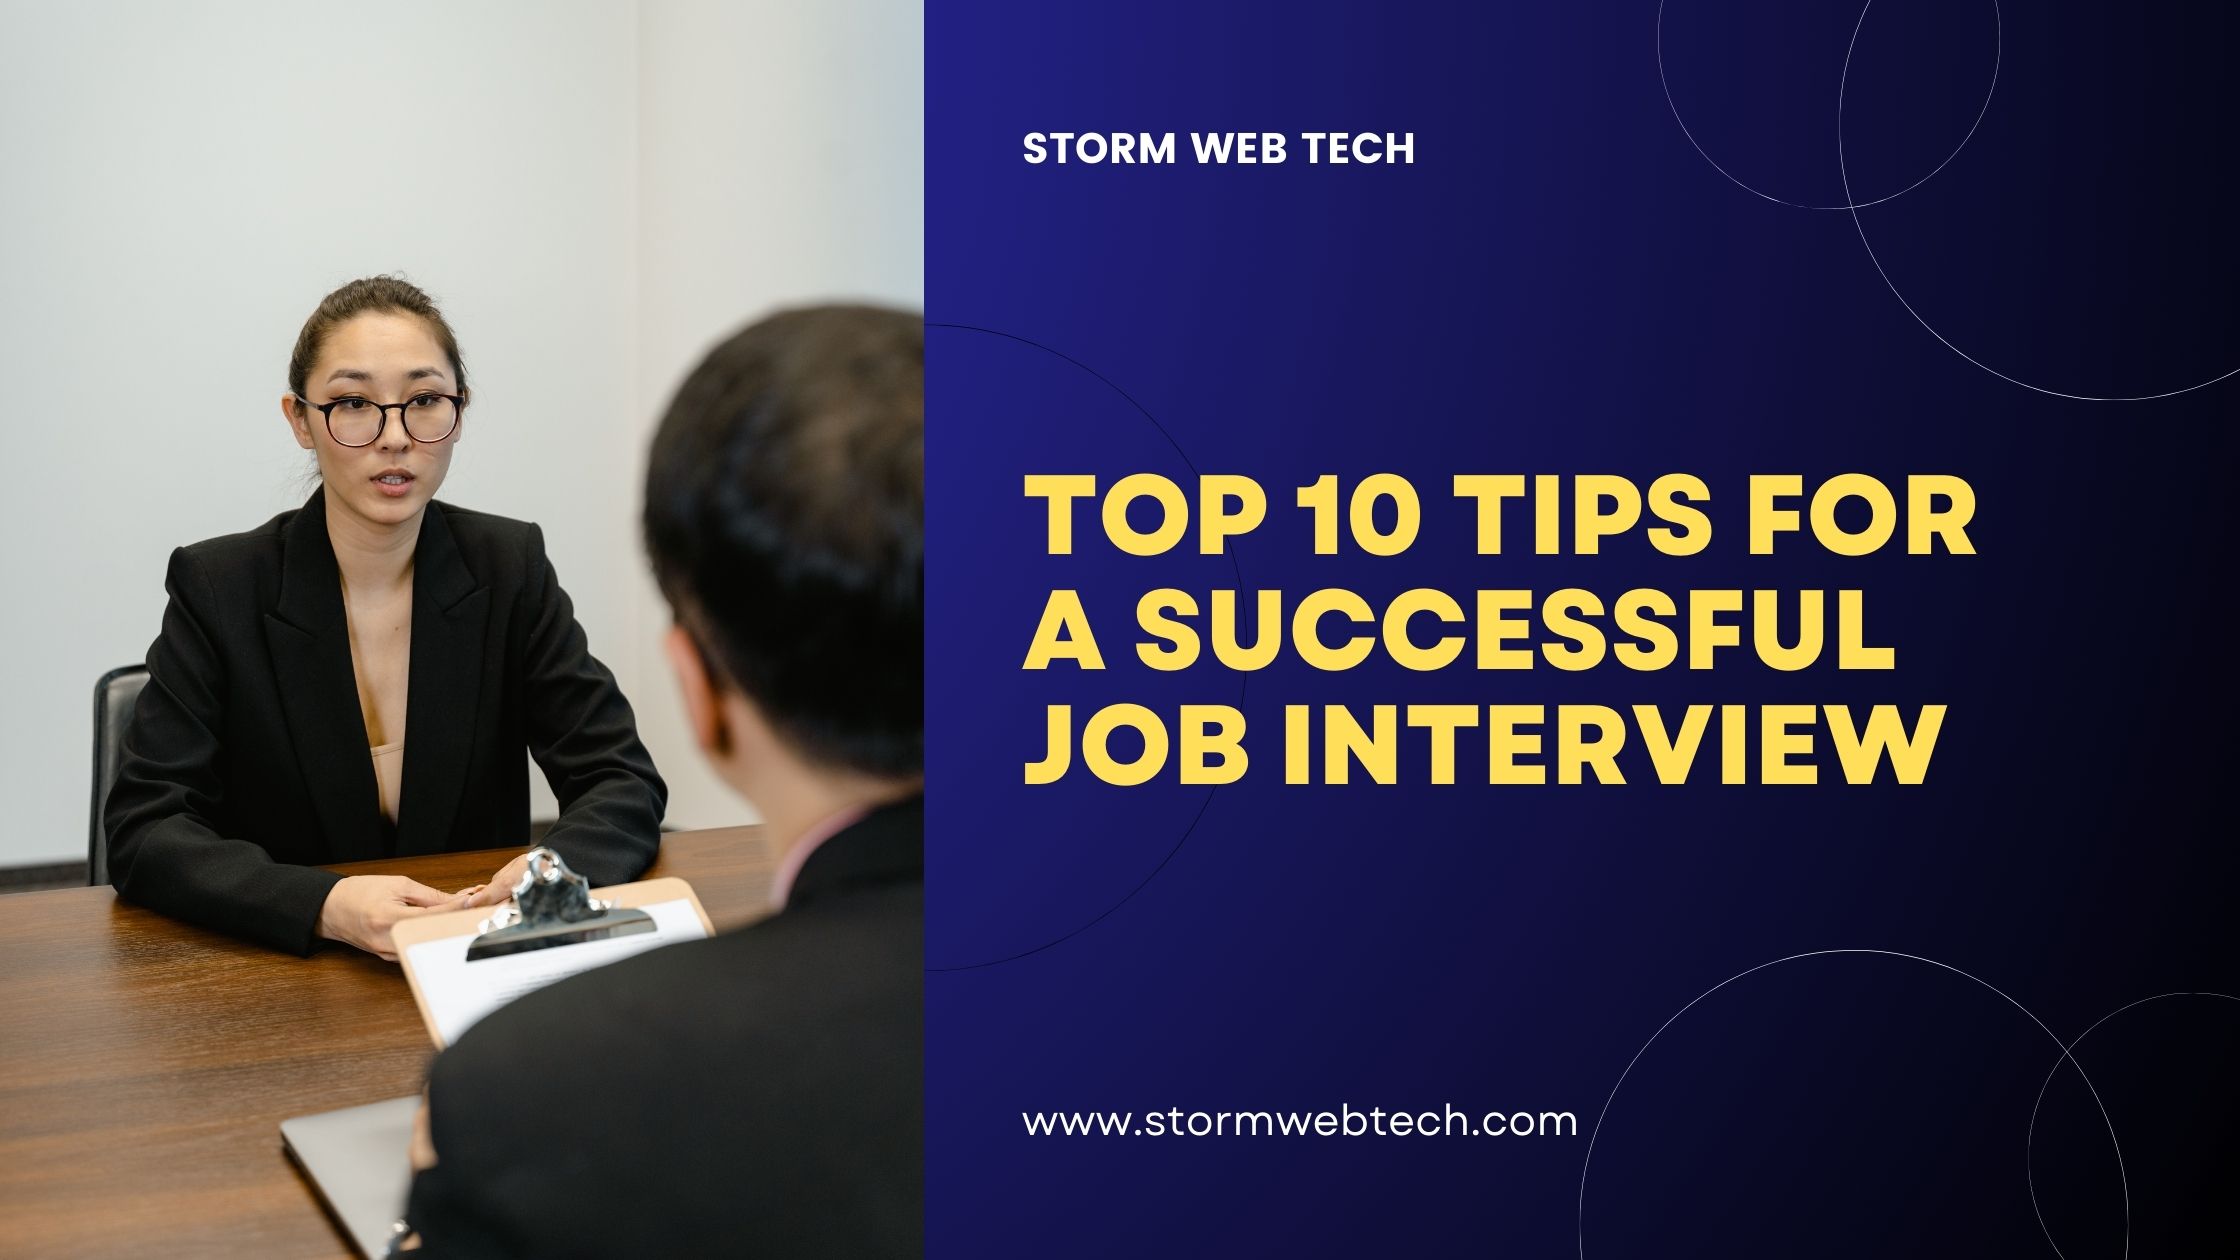 by following these top 10 tips for a successful job interview, you can increase your chances of acing your next interview and landing your dream job